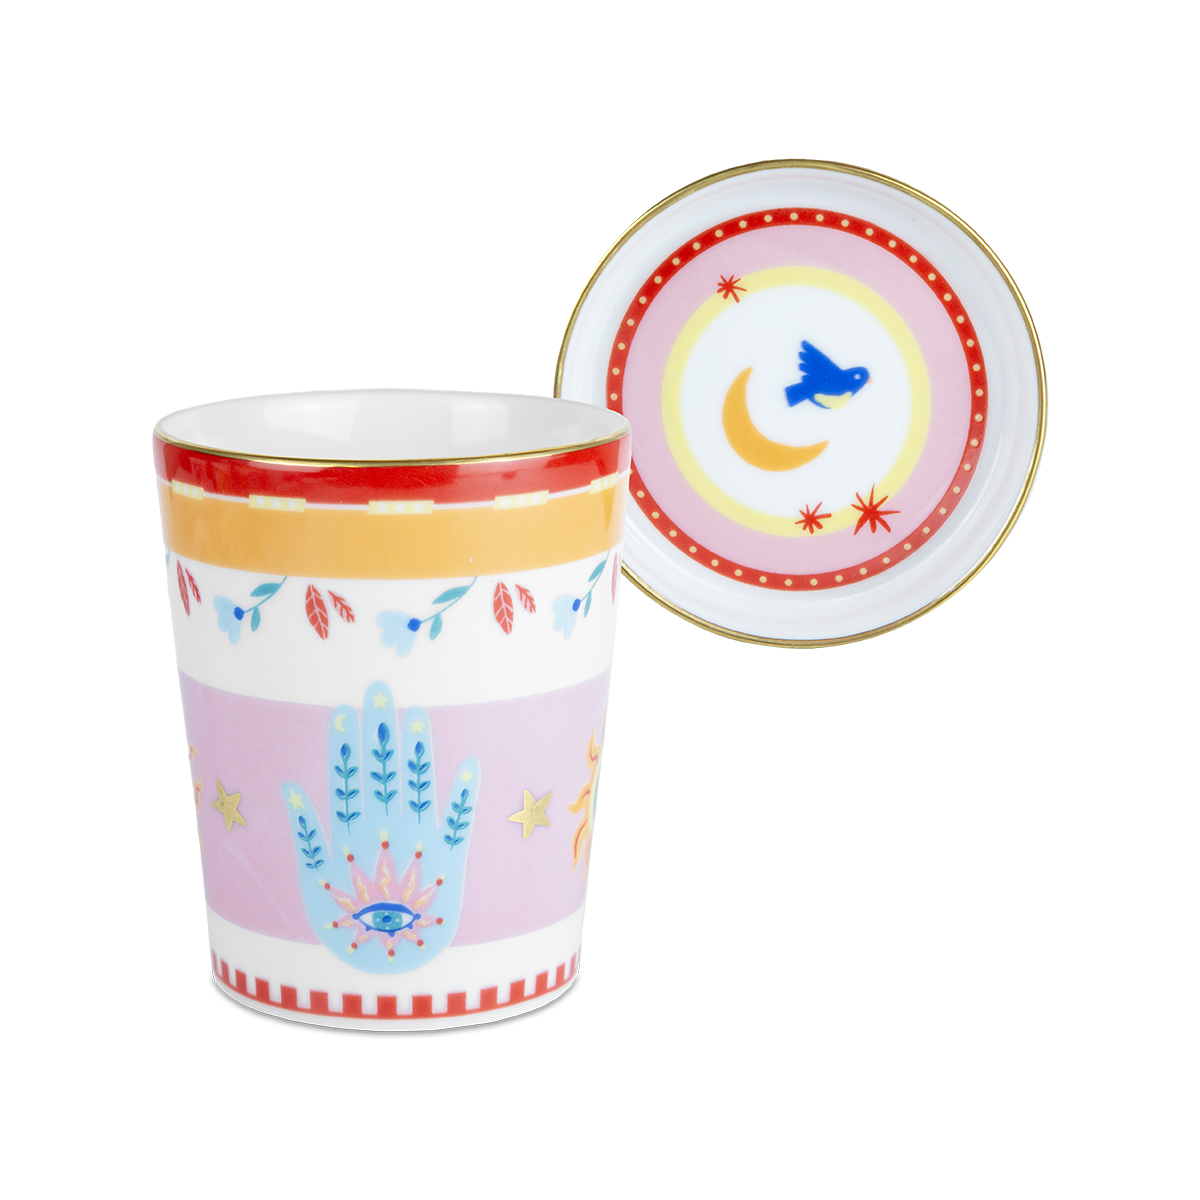 Porcelain glass with saucer/lid - Mamma Mia